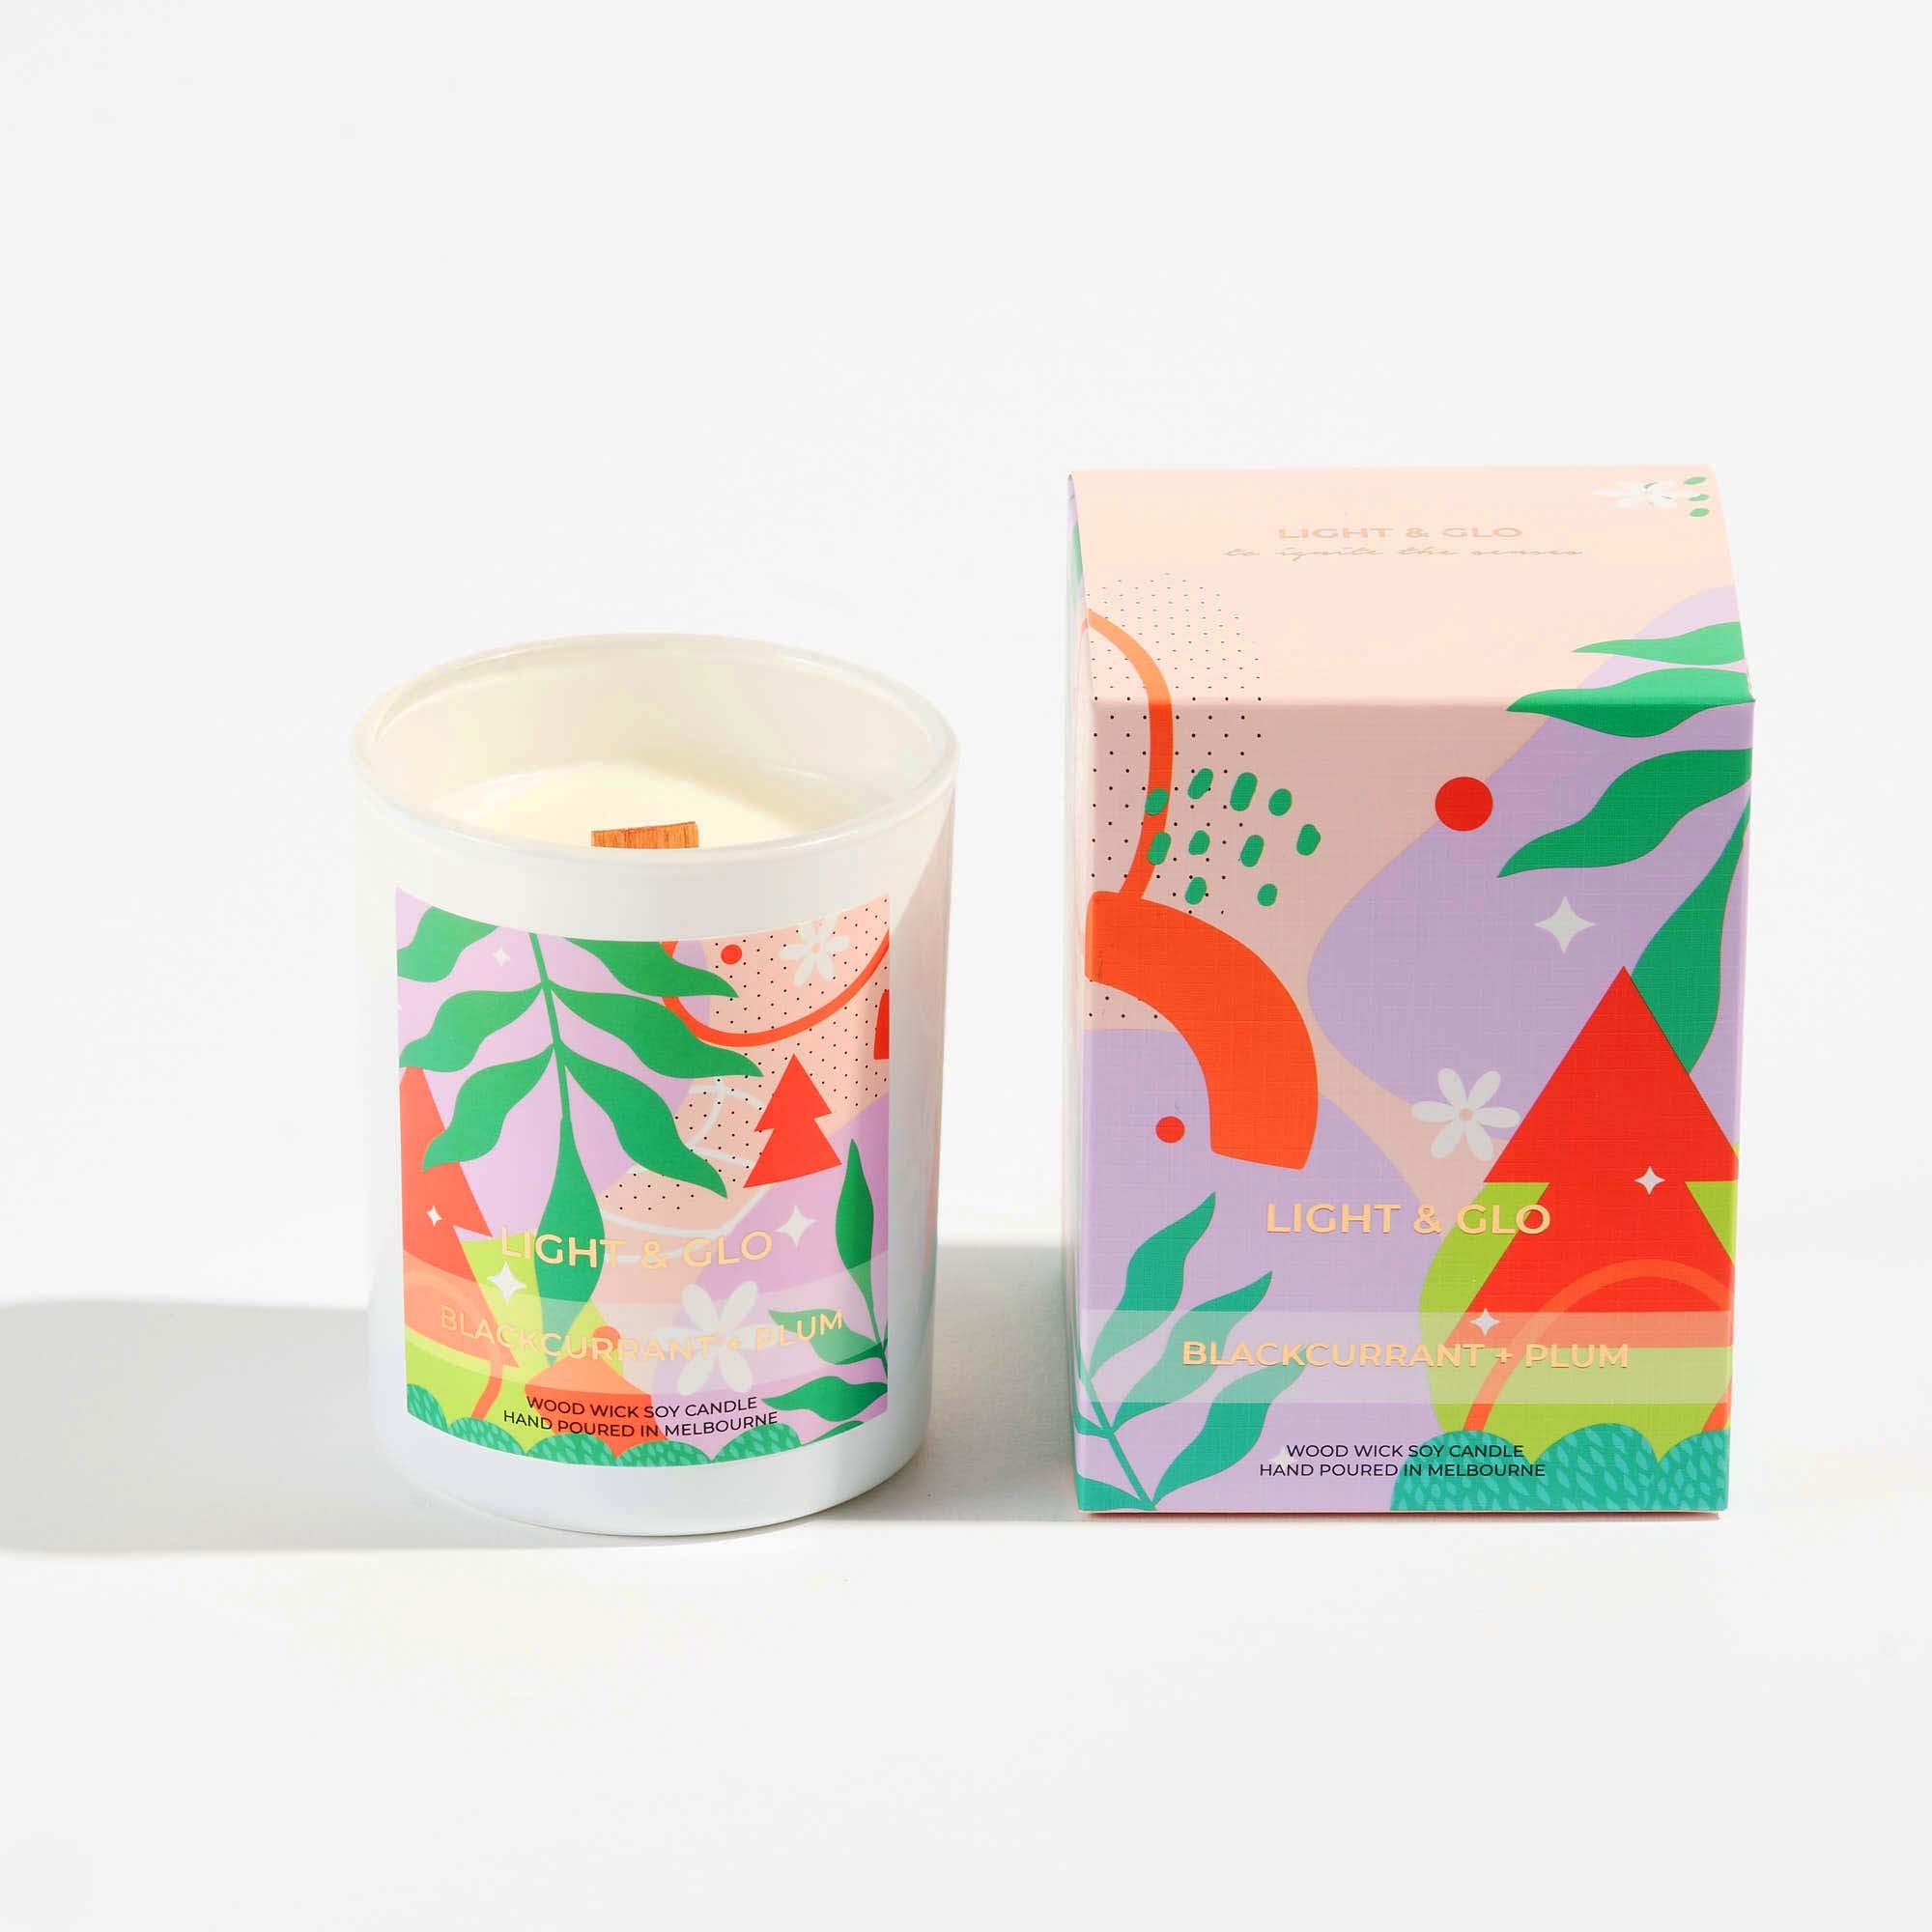 Christmas Candle - Black Currant & Plum | Luxury Candles & Home Fragrances by Light + Glo